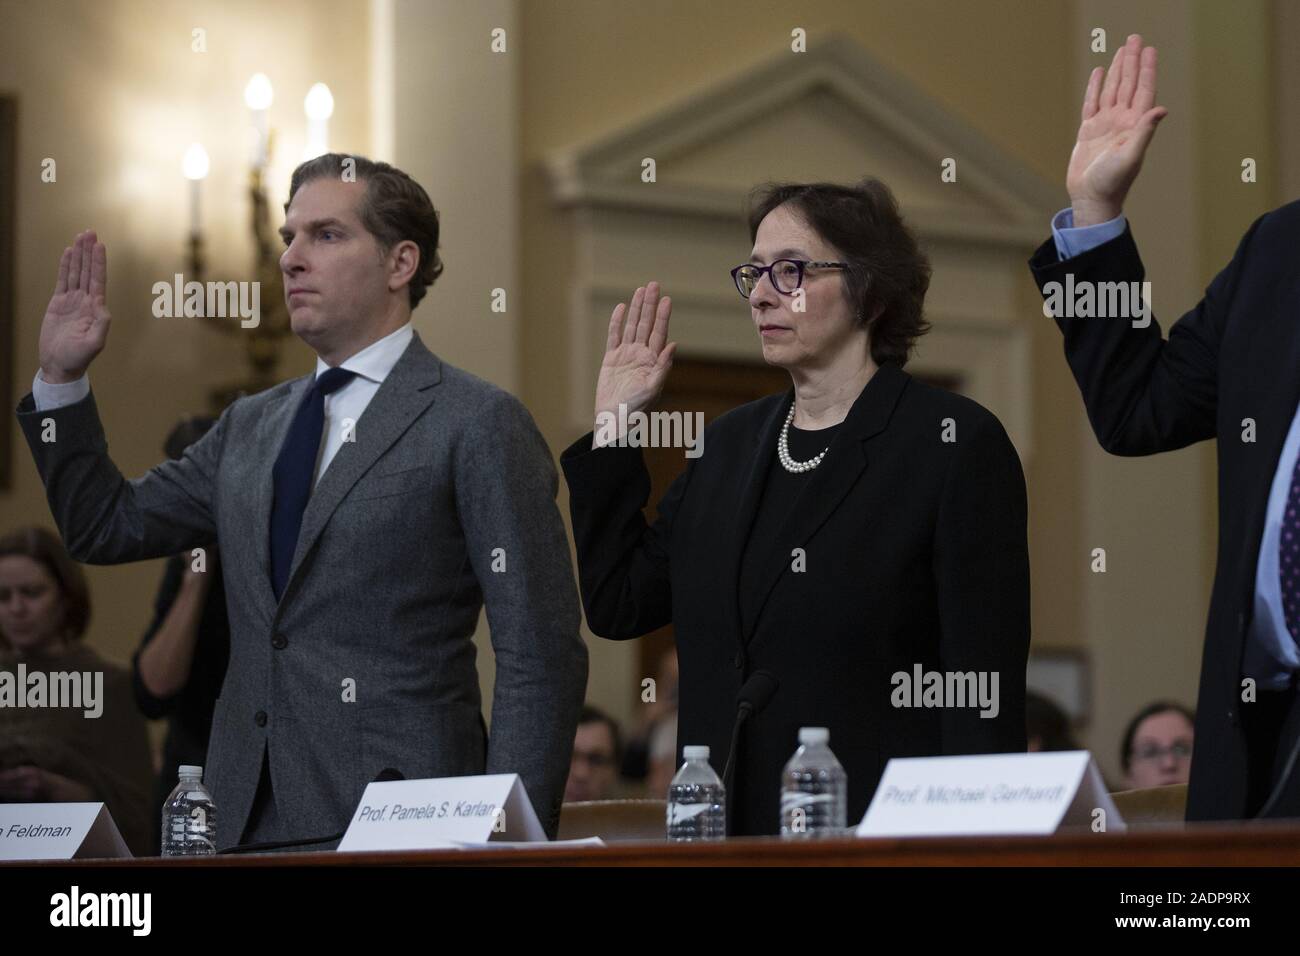 Washington, District of Columbia, USA. 4th Dec, 2019. Constitutional law experts Noah Feldman, of Harvard University, Pamela Karlan, of Stanford University, Michael Gerhardt, of the University of North Carolina, and Jonathan Turley of The George Washington University Law School, are sworn in before the United States House Committee on the Judiciary on Capitol Hill in Washington, DC, U.S. on Wednesday, December 4, 2019. Credit: Stefani Reynolds/CNP/ZUMA Wire/Alamy Live News Stock Photo